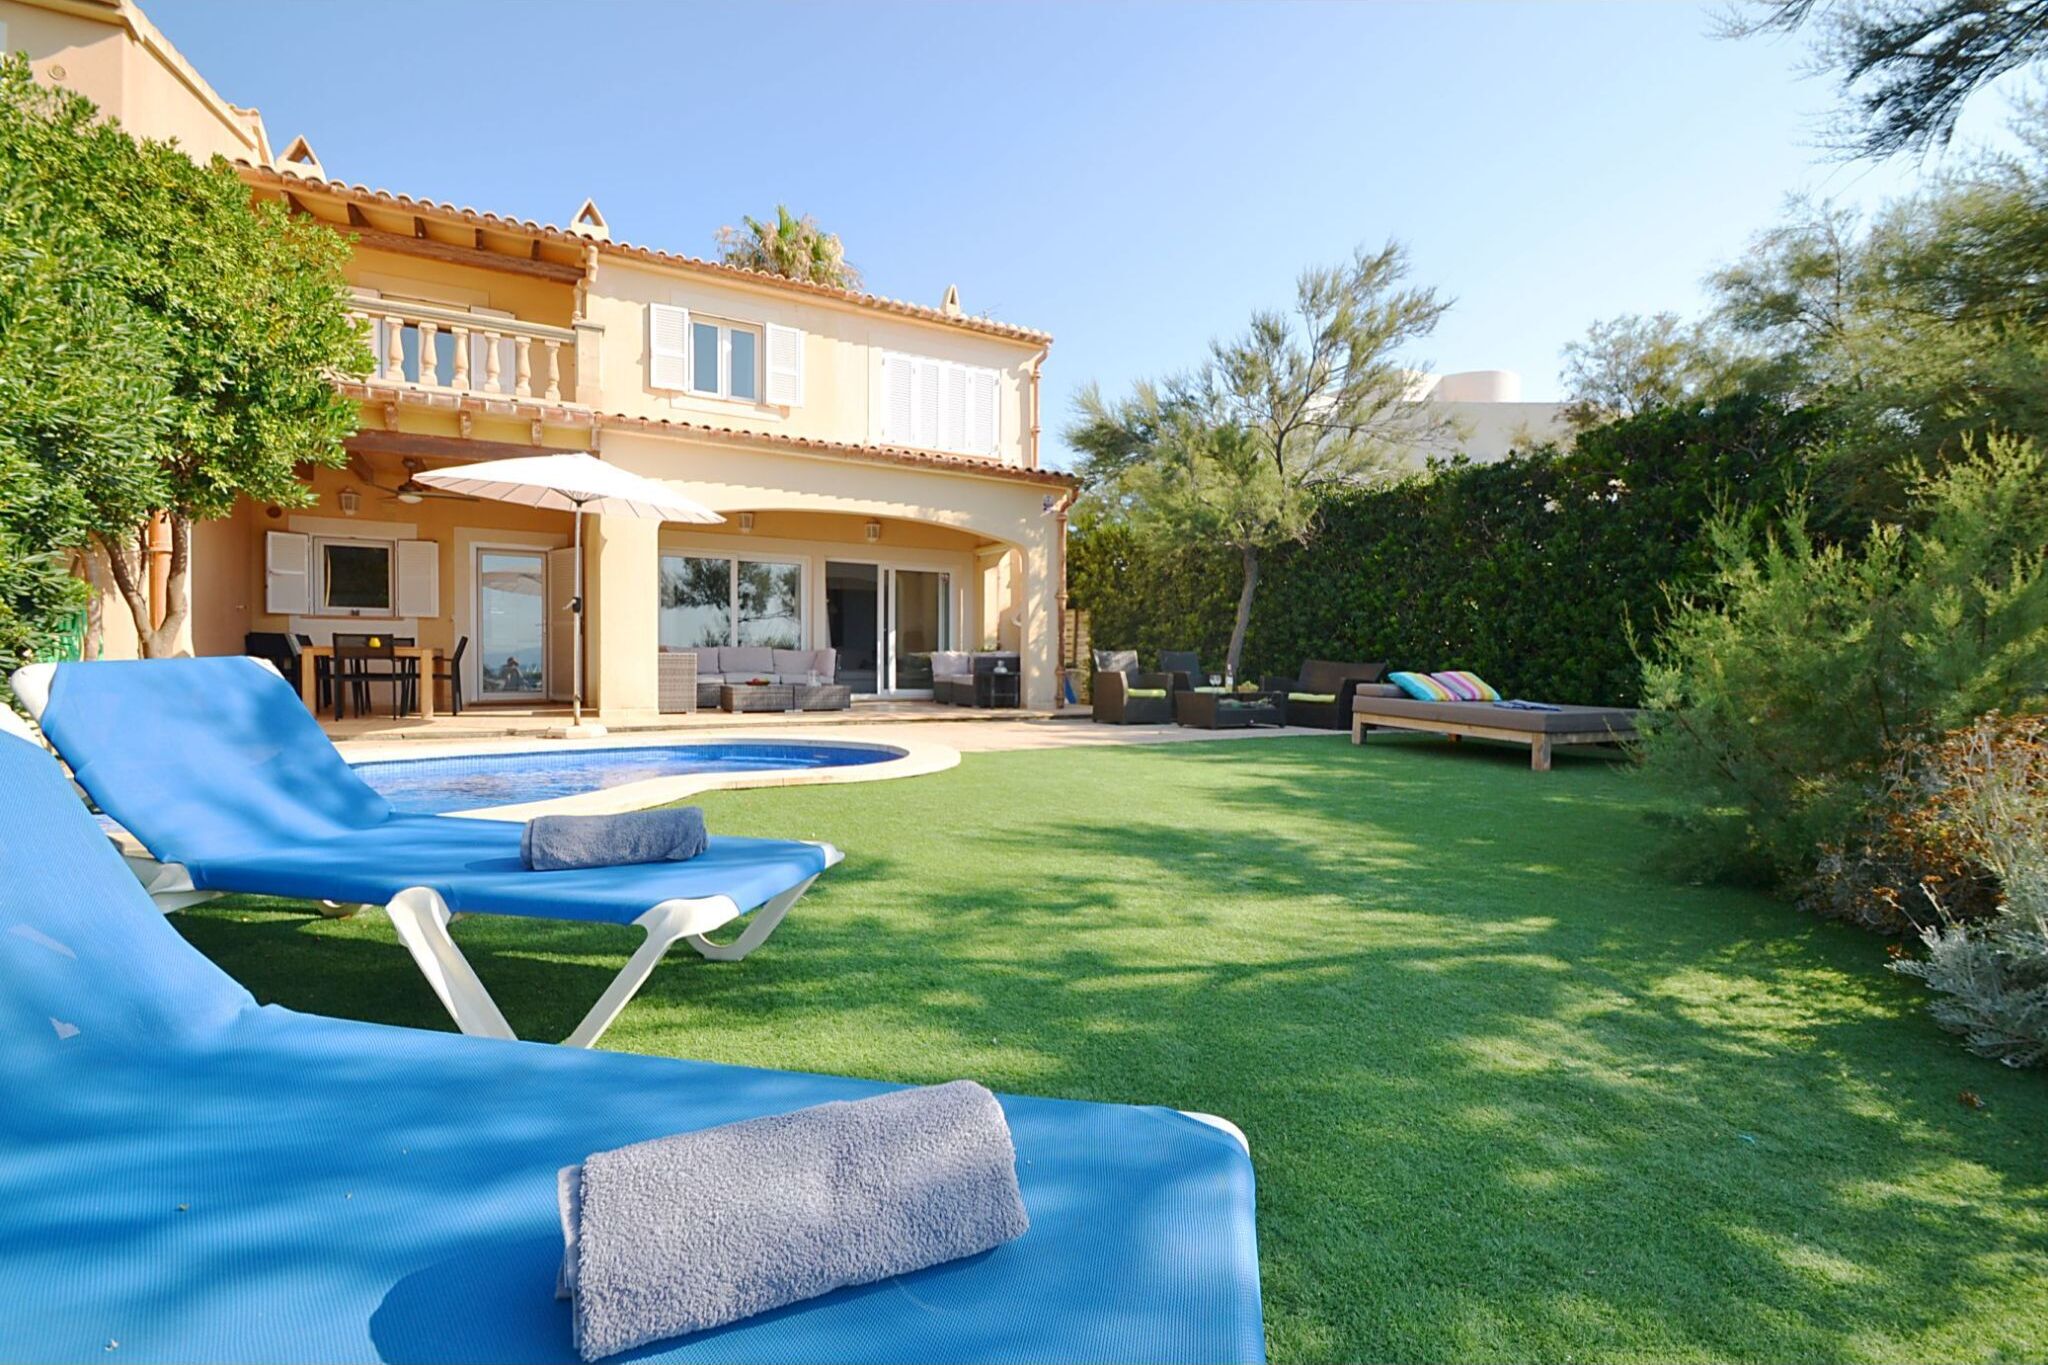 Fun, connected holiday home just 200m from wide sandy beach on Mallorca